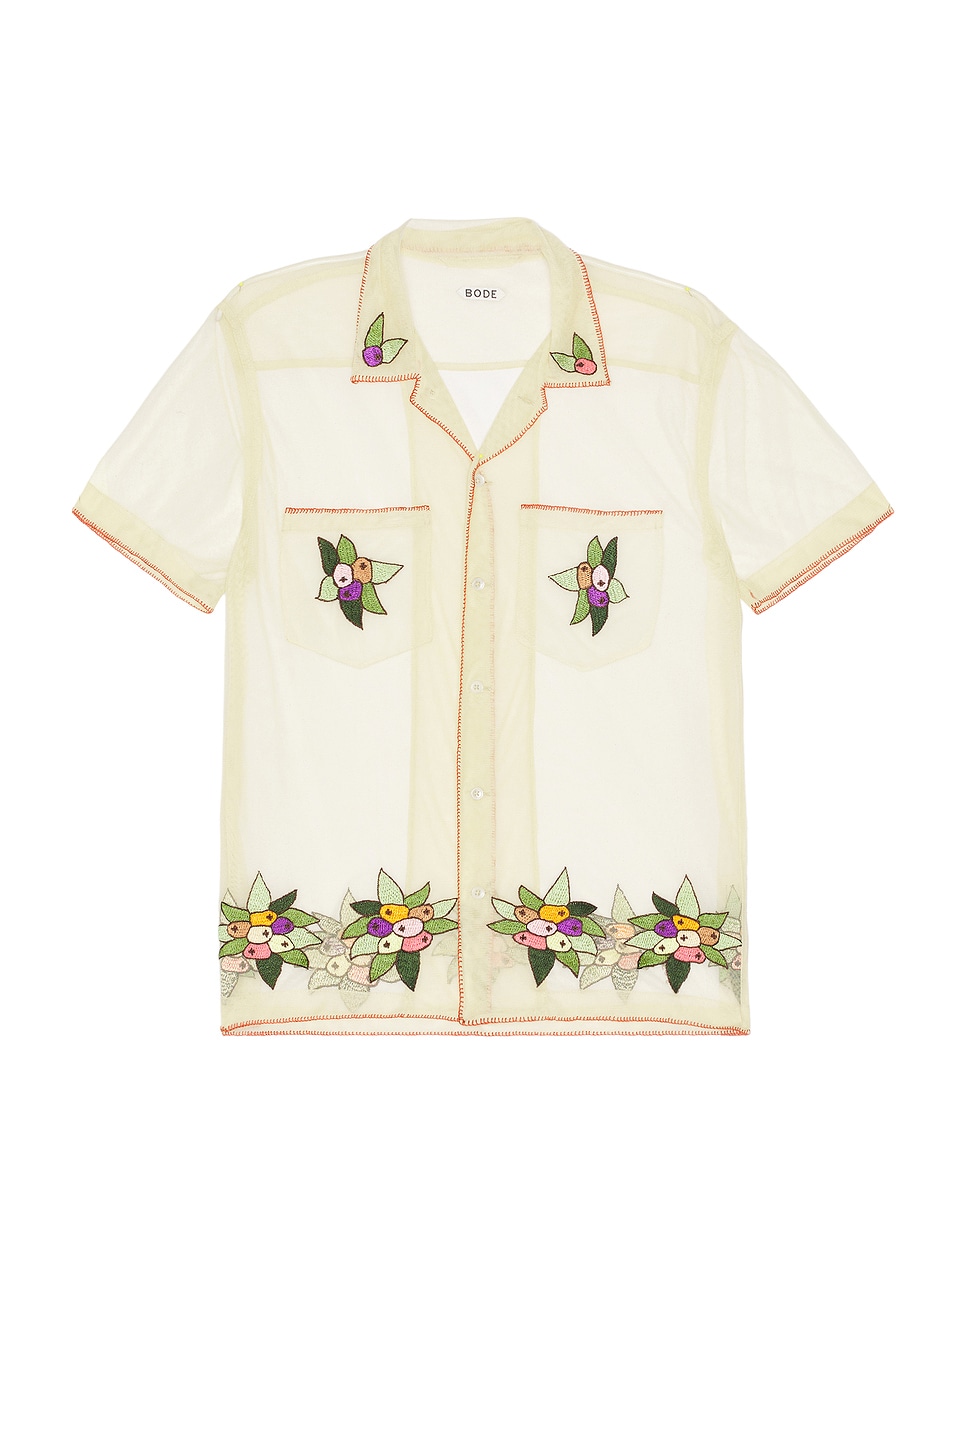 Image 1 of BODE Embroidered Suncherry Short Sleeve Shirt in White Multi